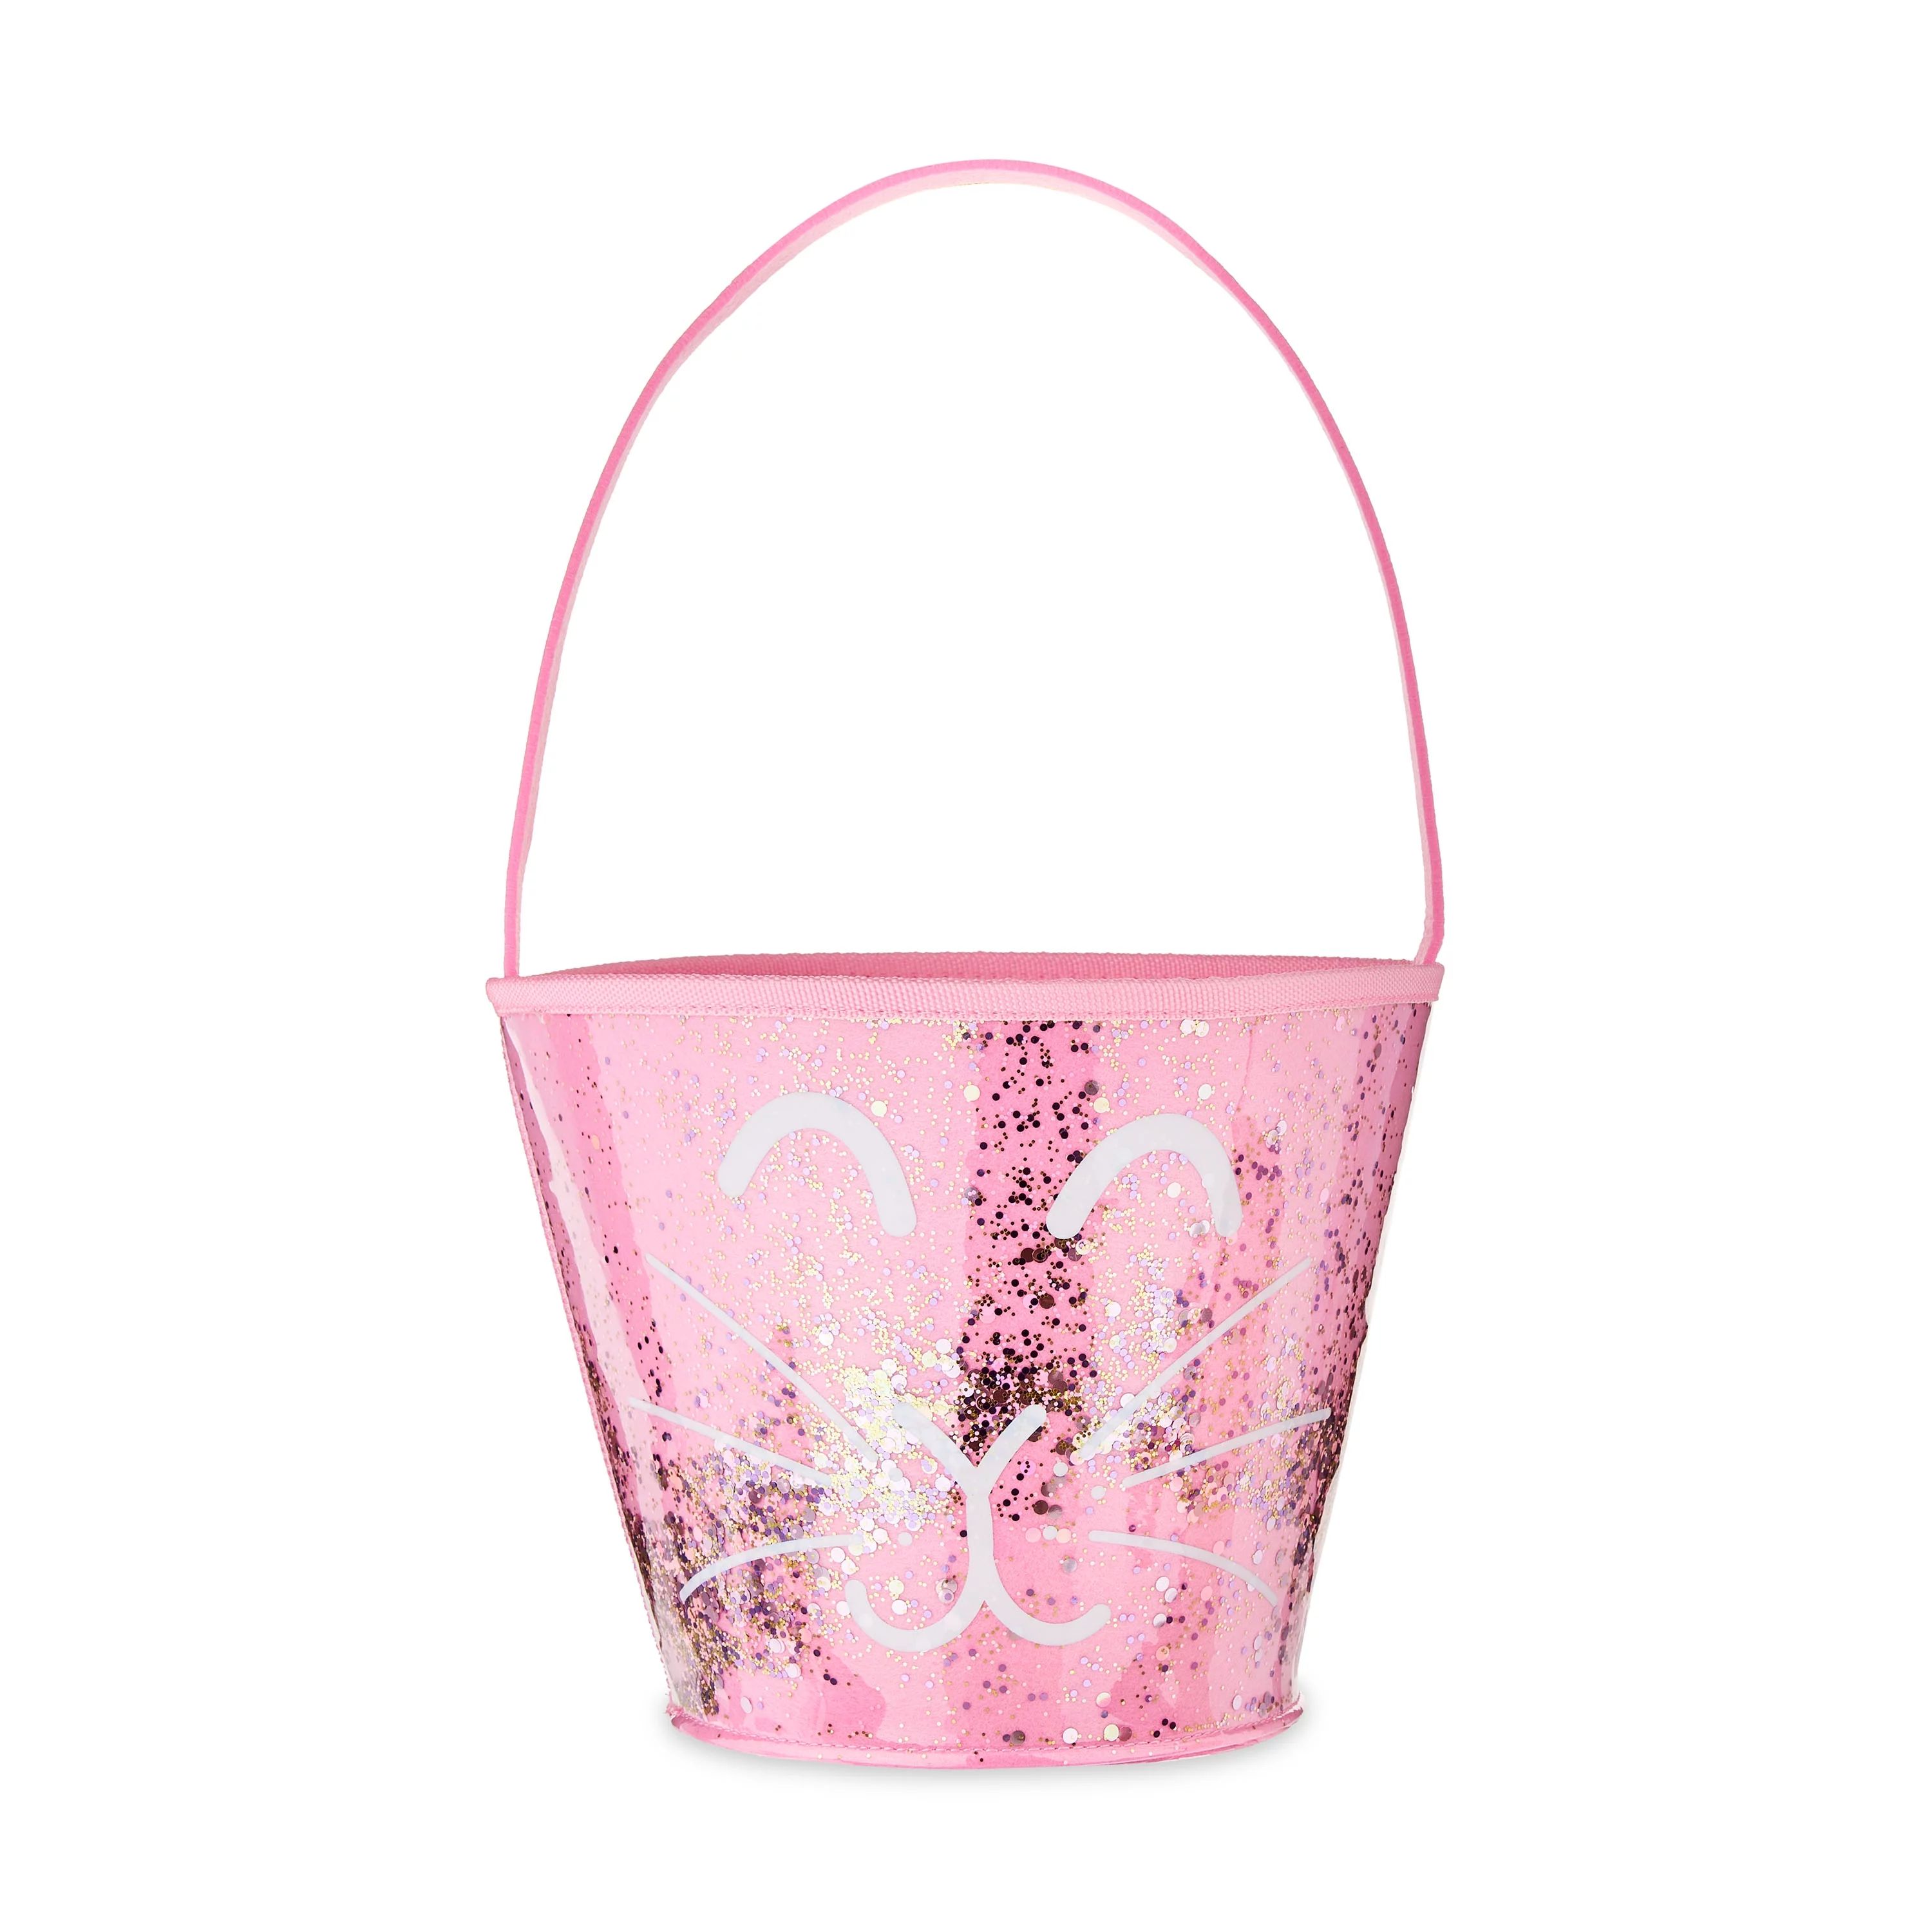 Packed Party 'Hoppy Easter' Pink Confetti Bunny Easter Basket, Soft Felt  with Handle | Walmart (US)